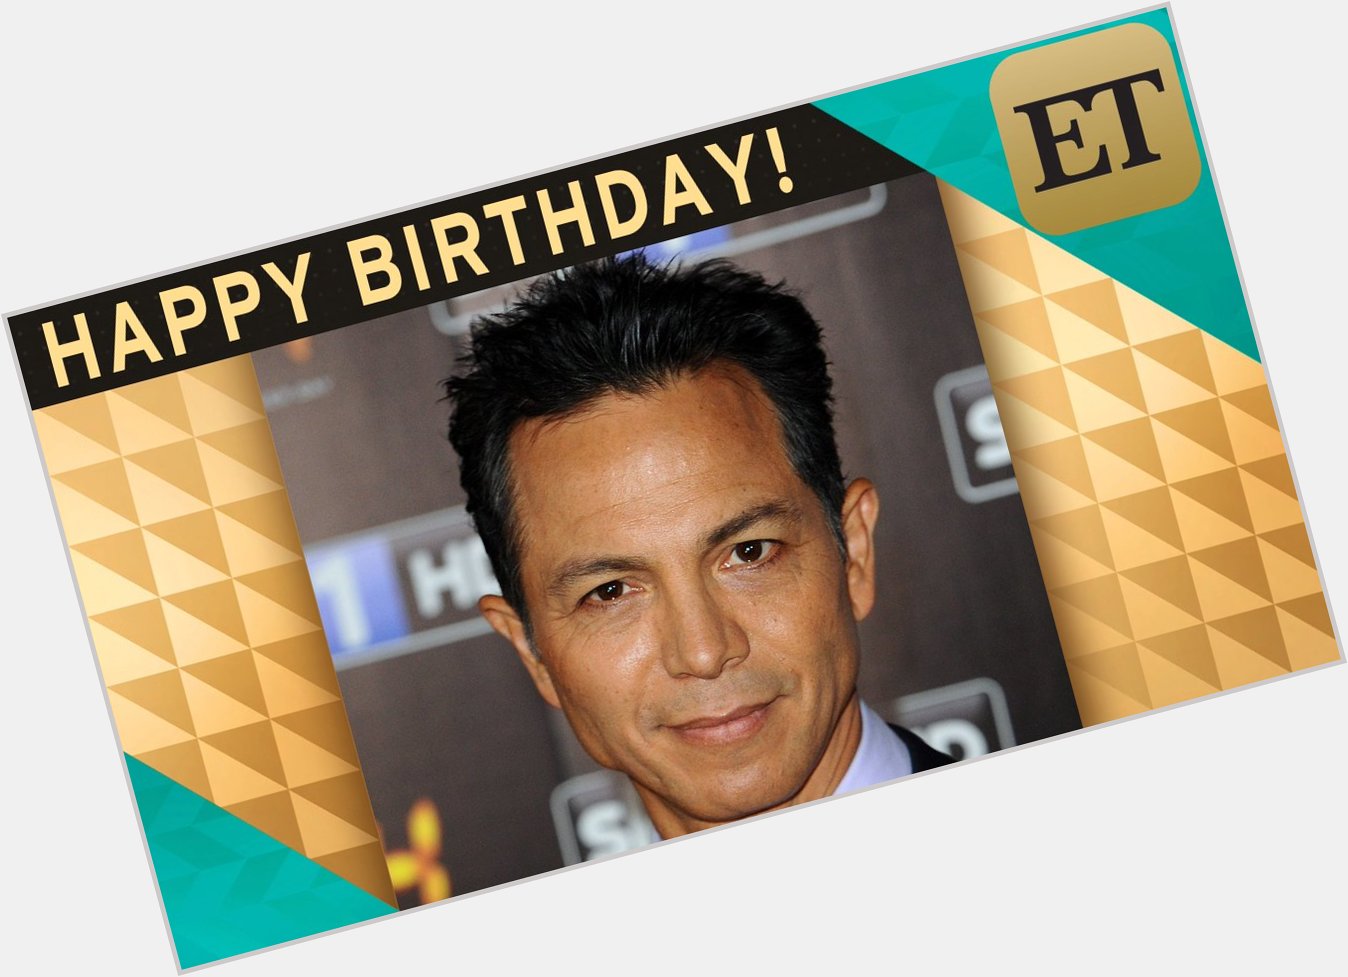 Happy birthday, Benjamin Bratt! We bet he\ll be just as suave this year as last year. 